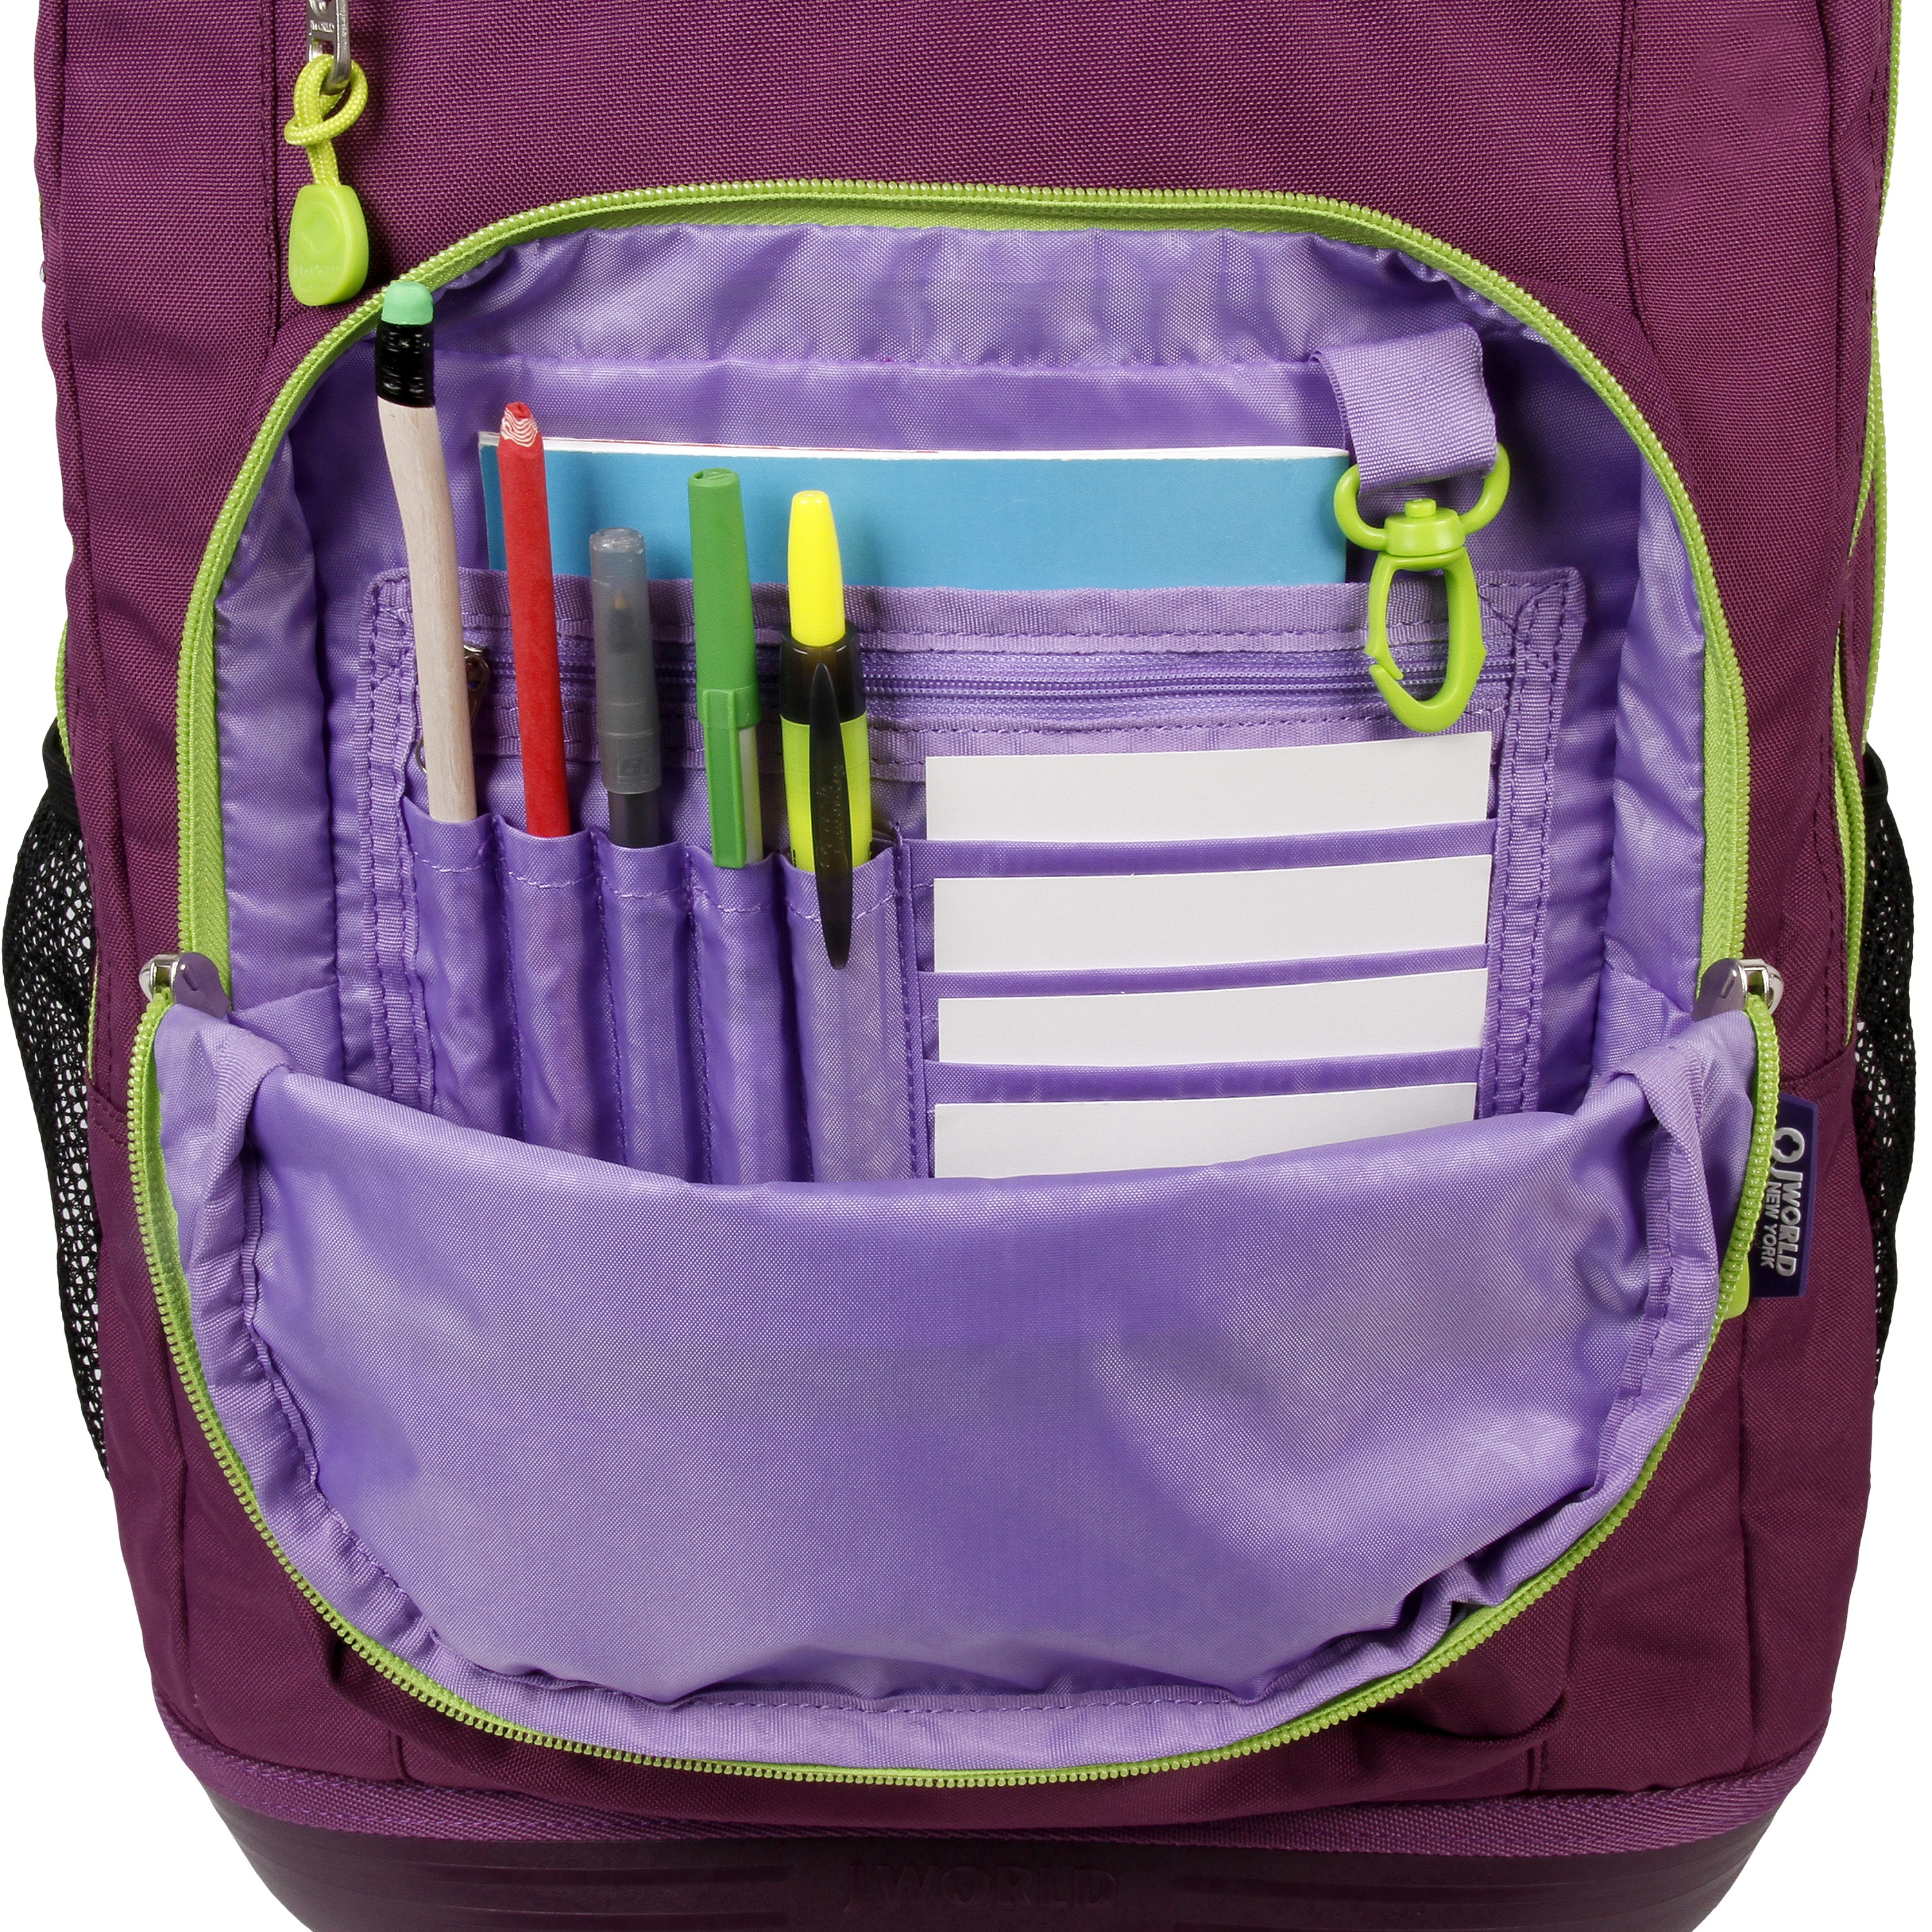 J World Girls Sundance 20" Rolling Backpack With Laptop Sleeve For School And Travel, Purple - image 4 of 9